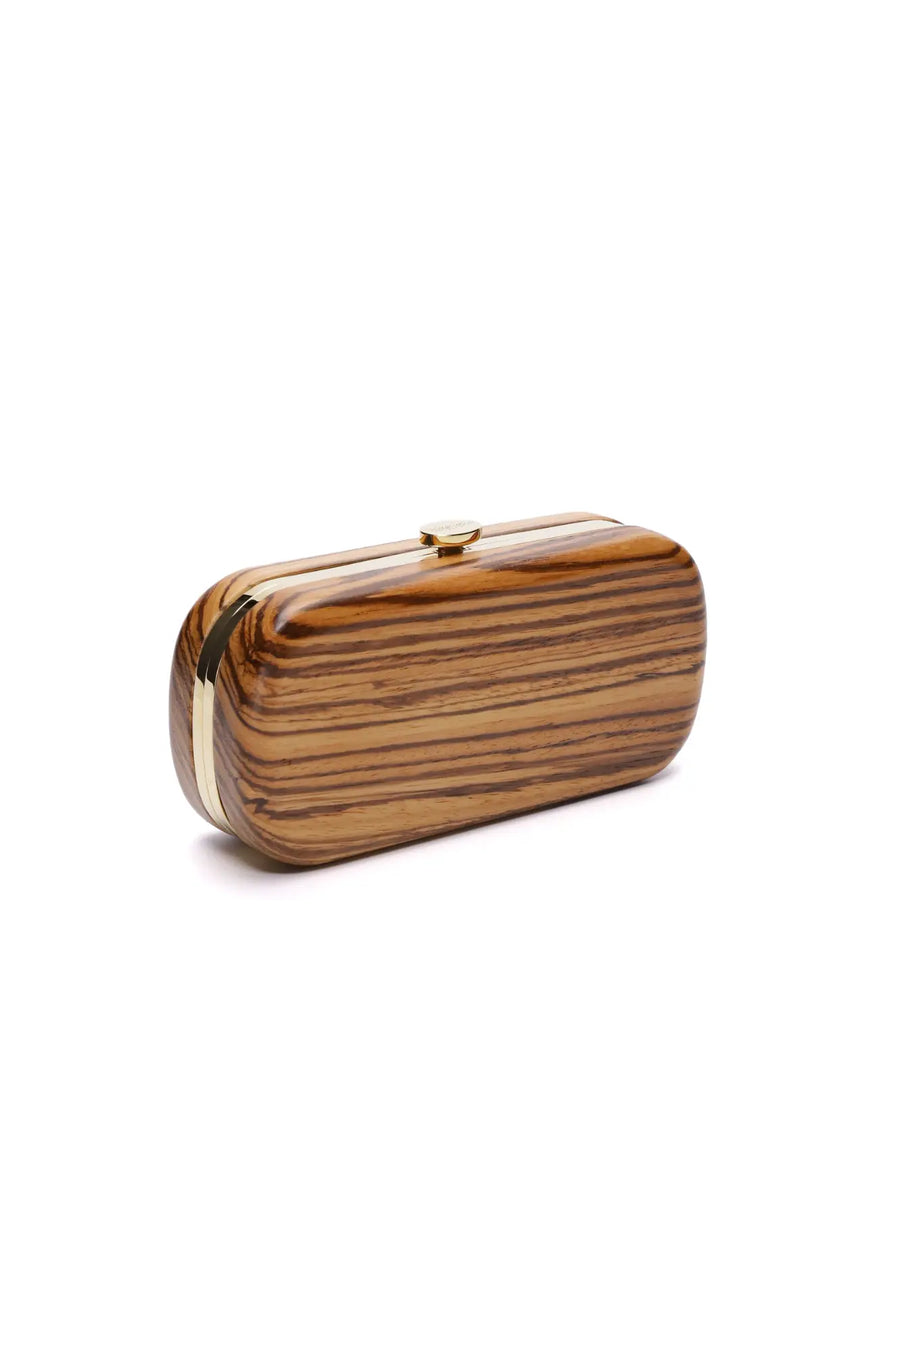 A sustainably sourced Bella Clutch African Zebra Wood Petite with a gold clasp on a white background by The Bella Rosa Collection.